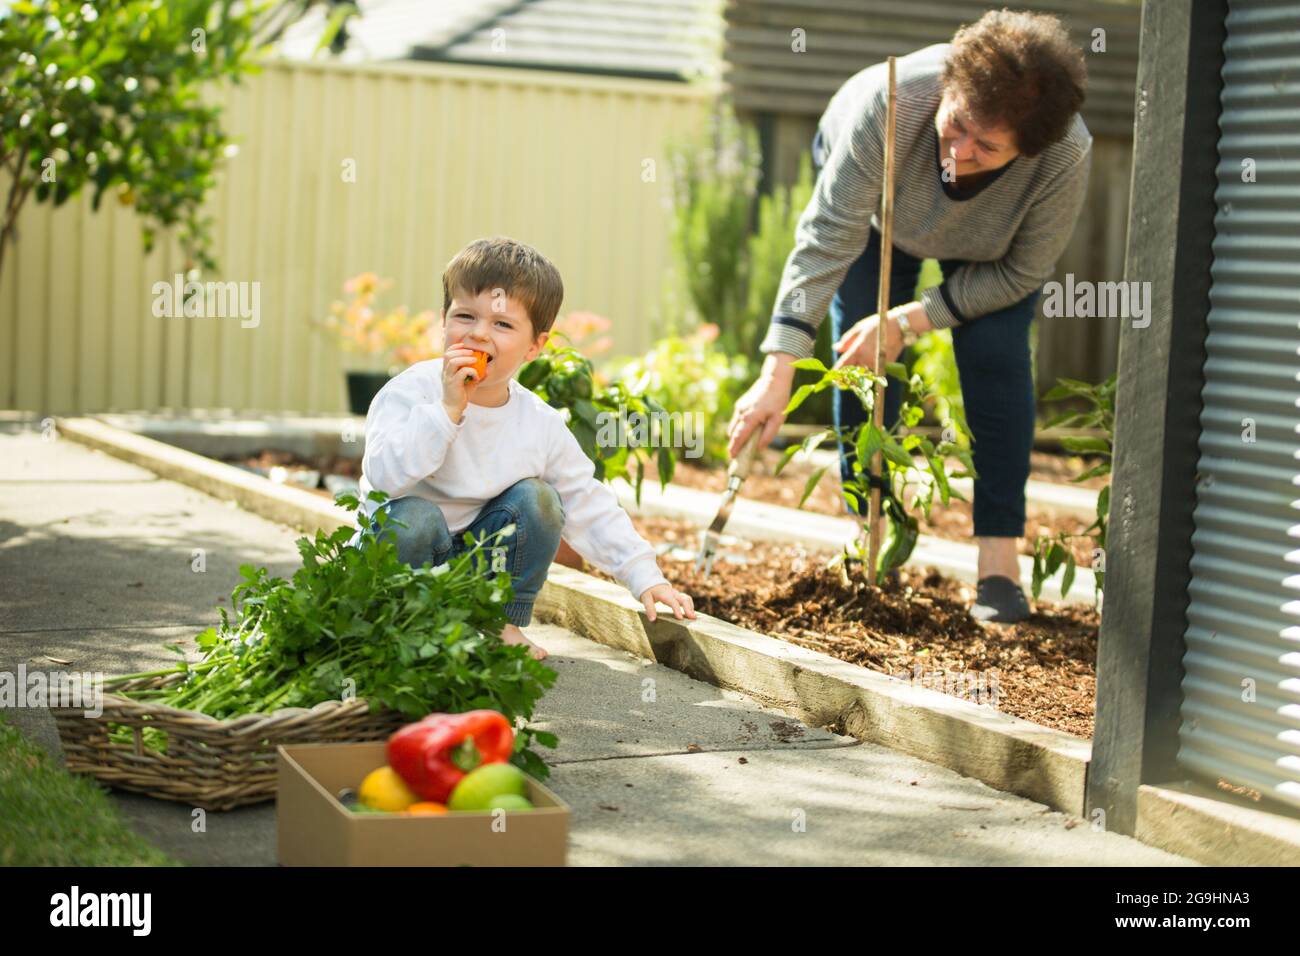 Young boy eating a pepper with his grandmother working in the garden. Stock Photo